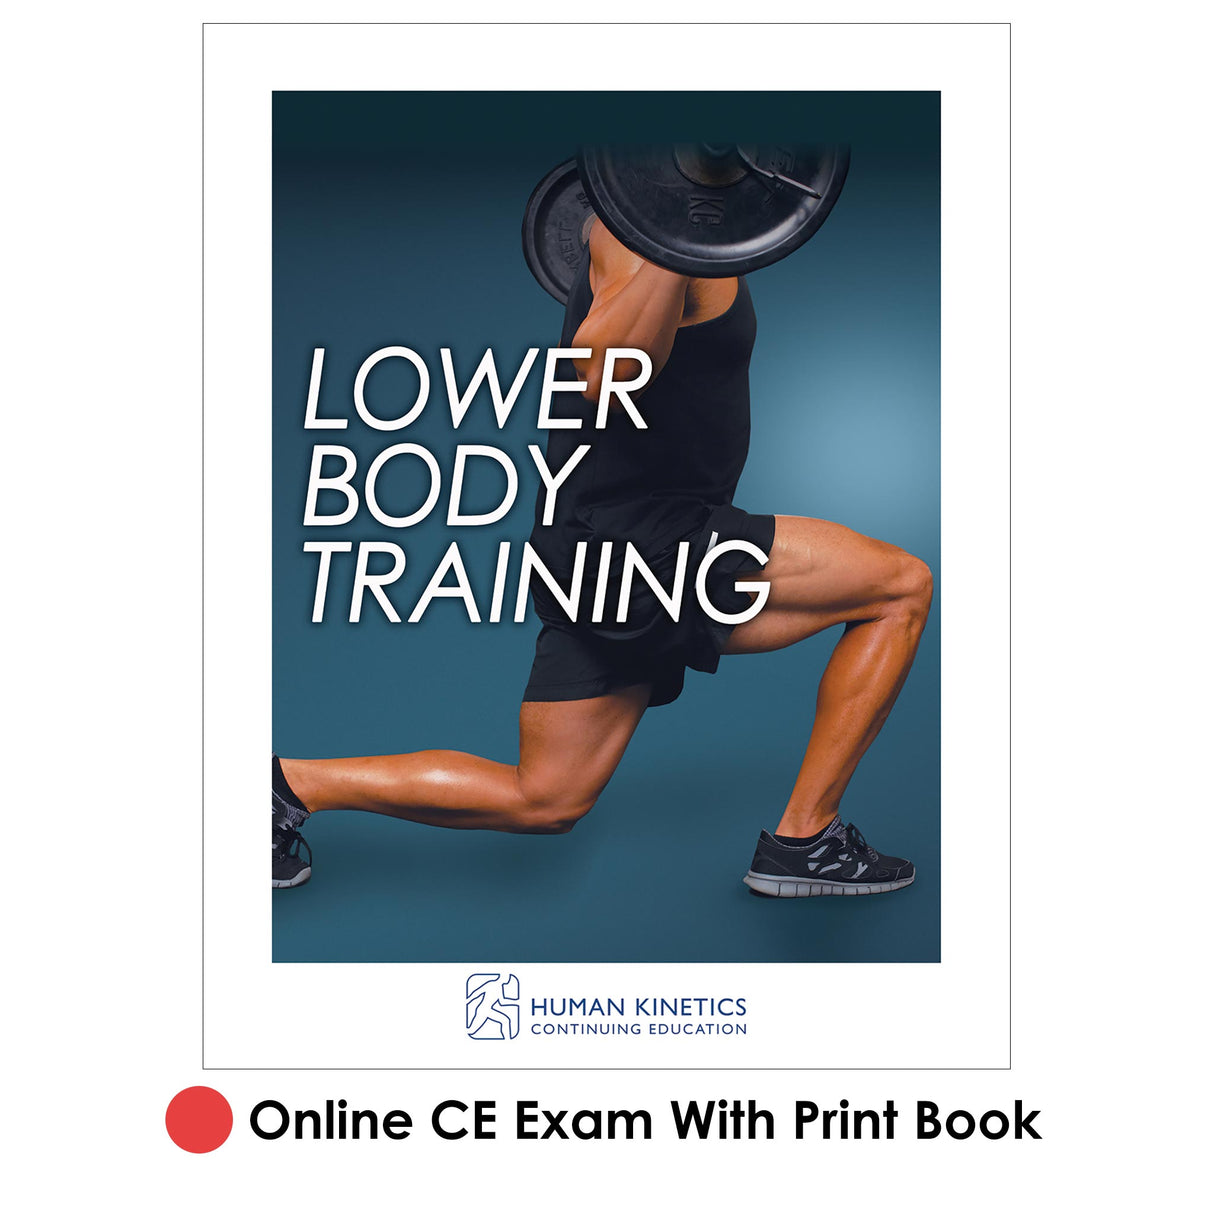 Lower Body Training Online CE Exam With Print Book